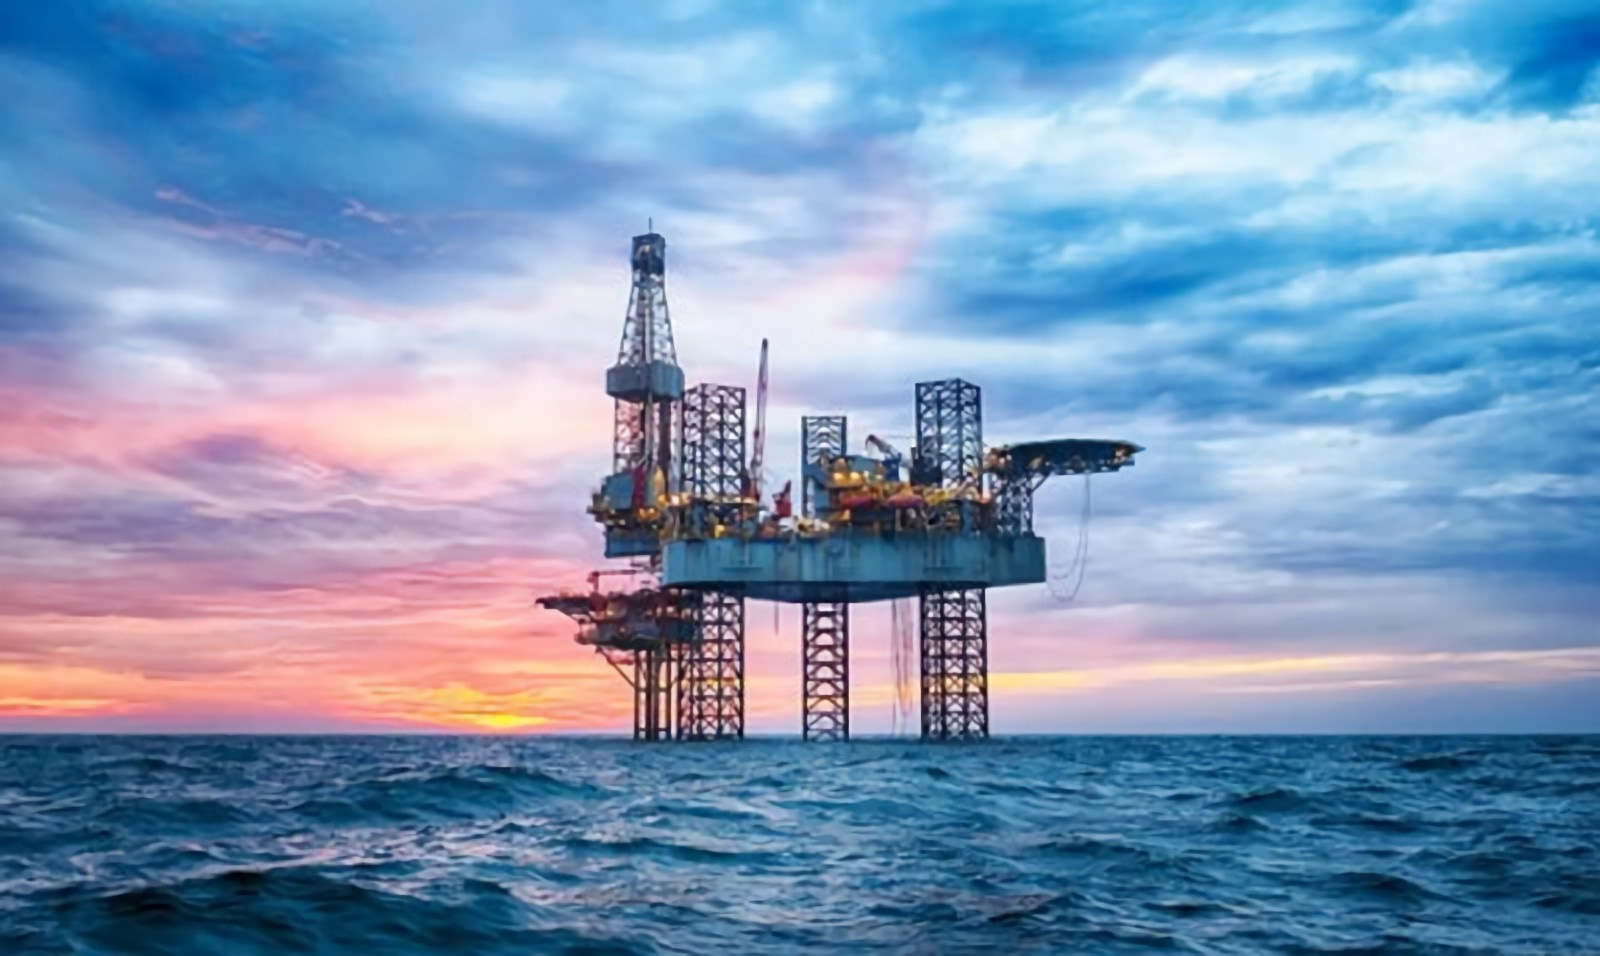 More time for UK oil & gas firm to get funding for purchase of North Sea license